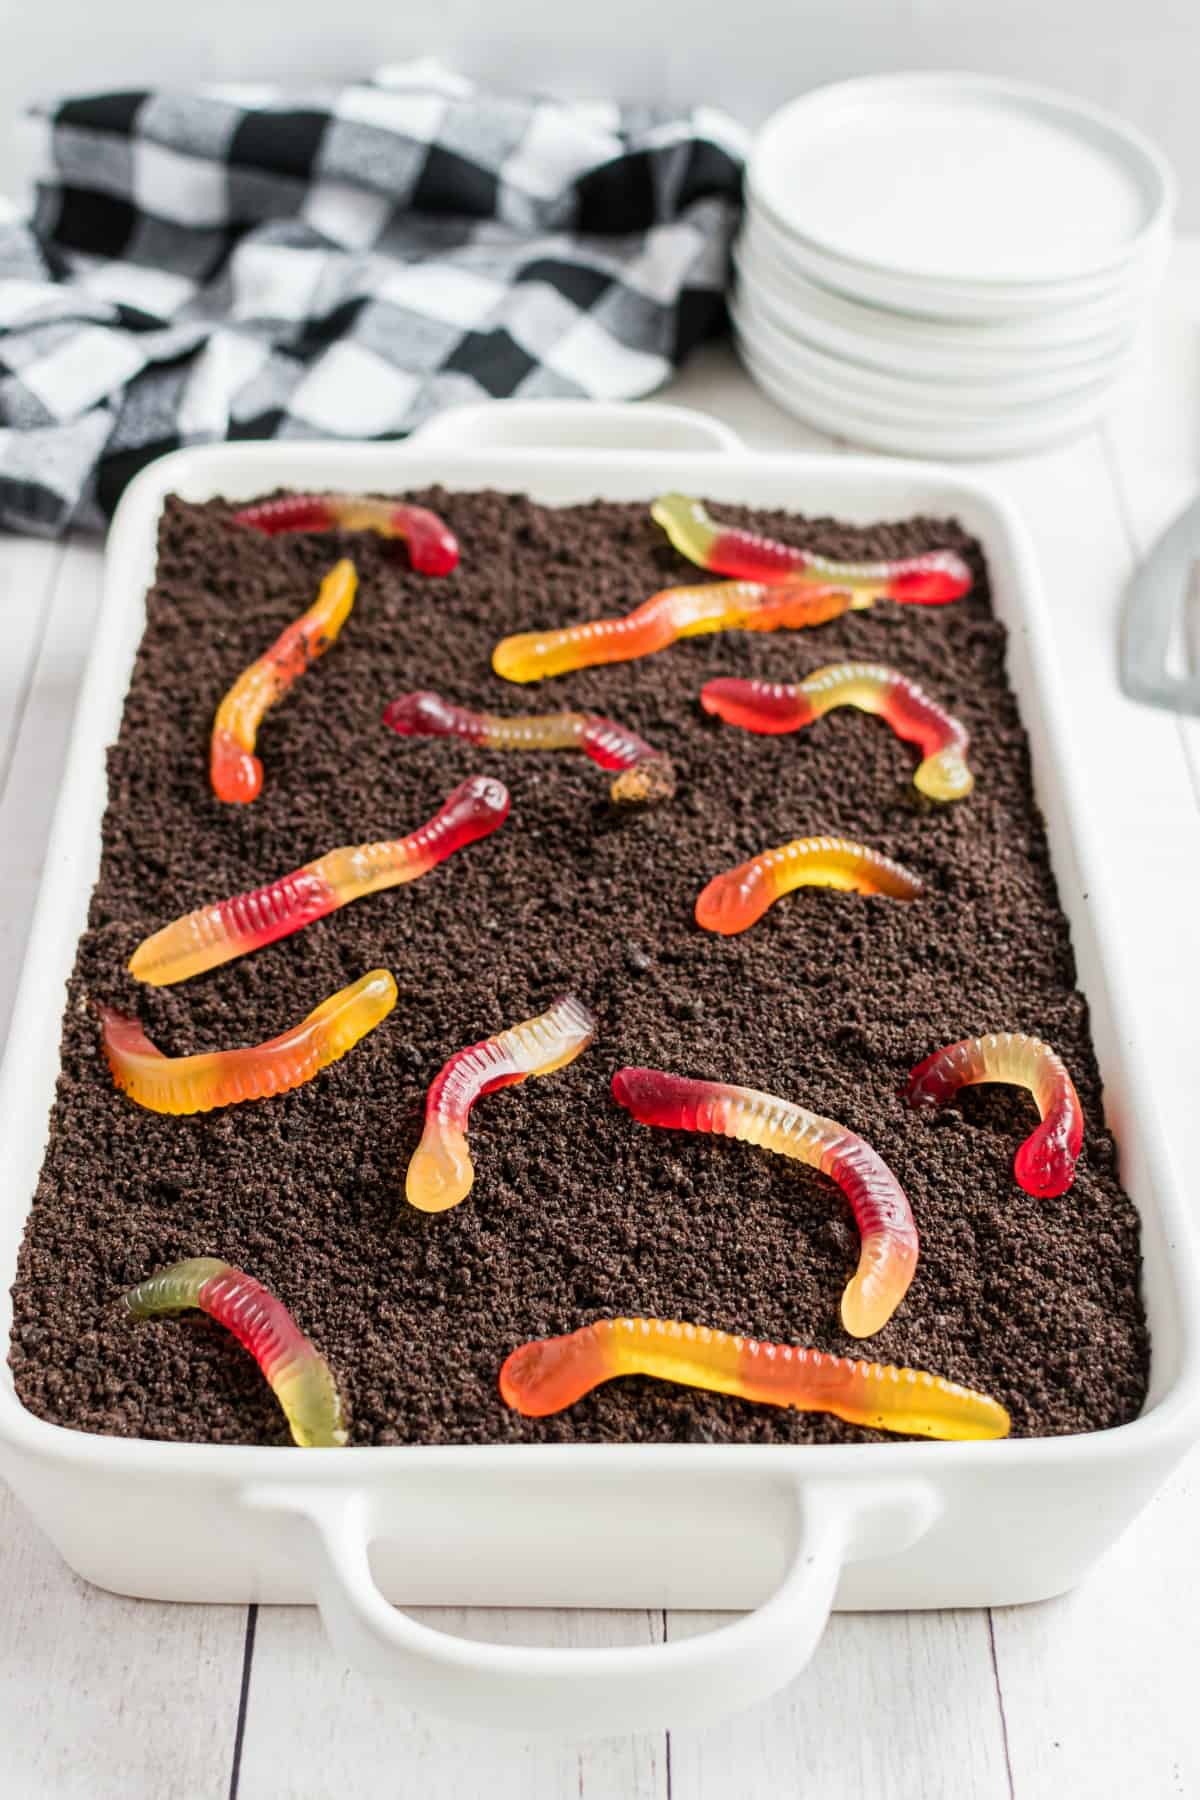 Dirt cake with gummi worms in a 13x9 white baking dish.